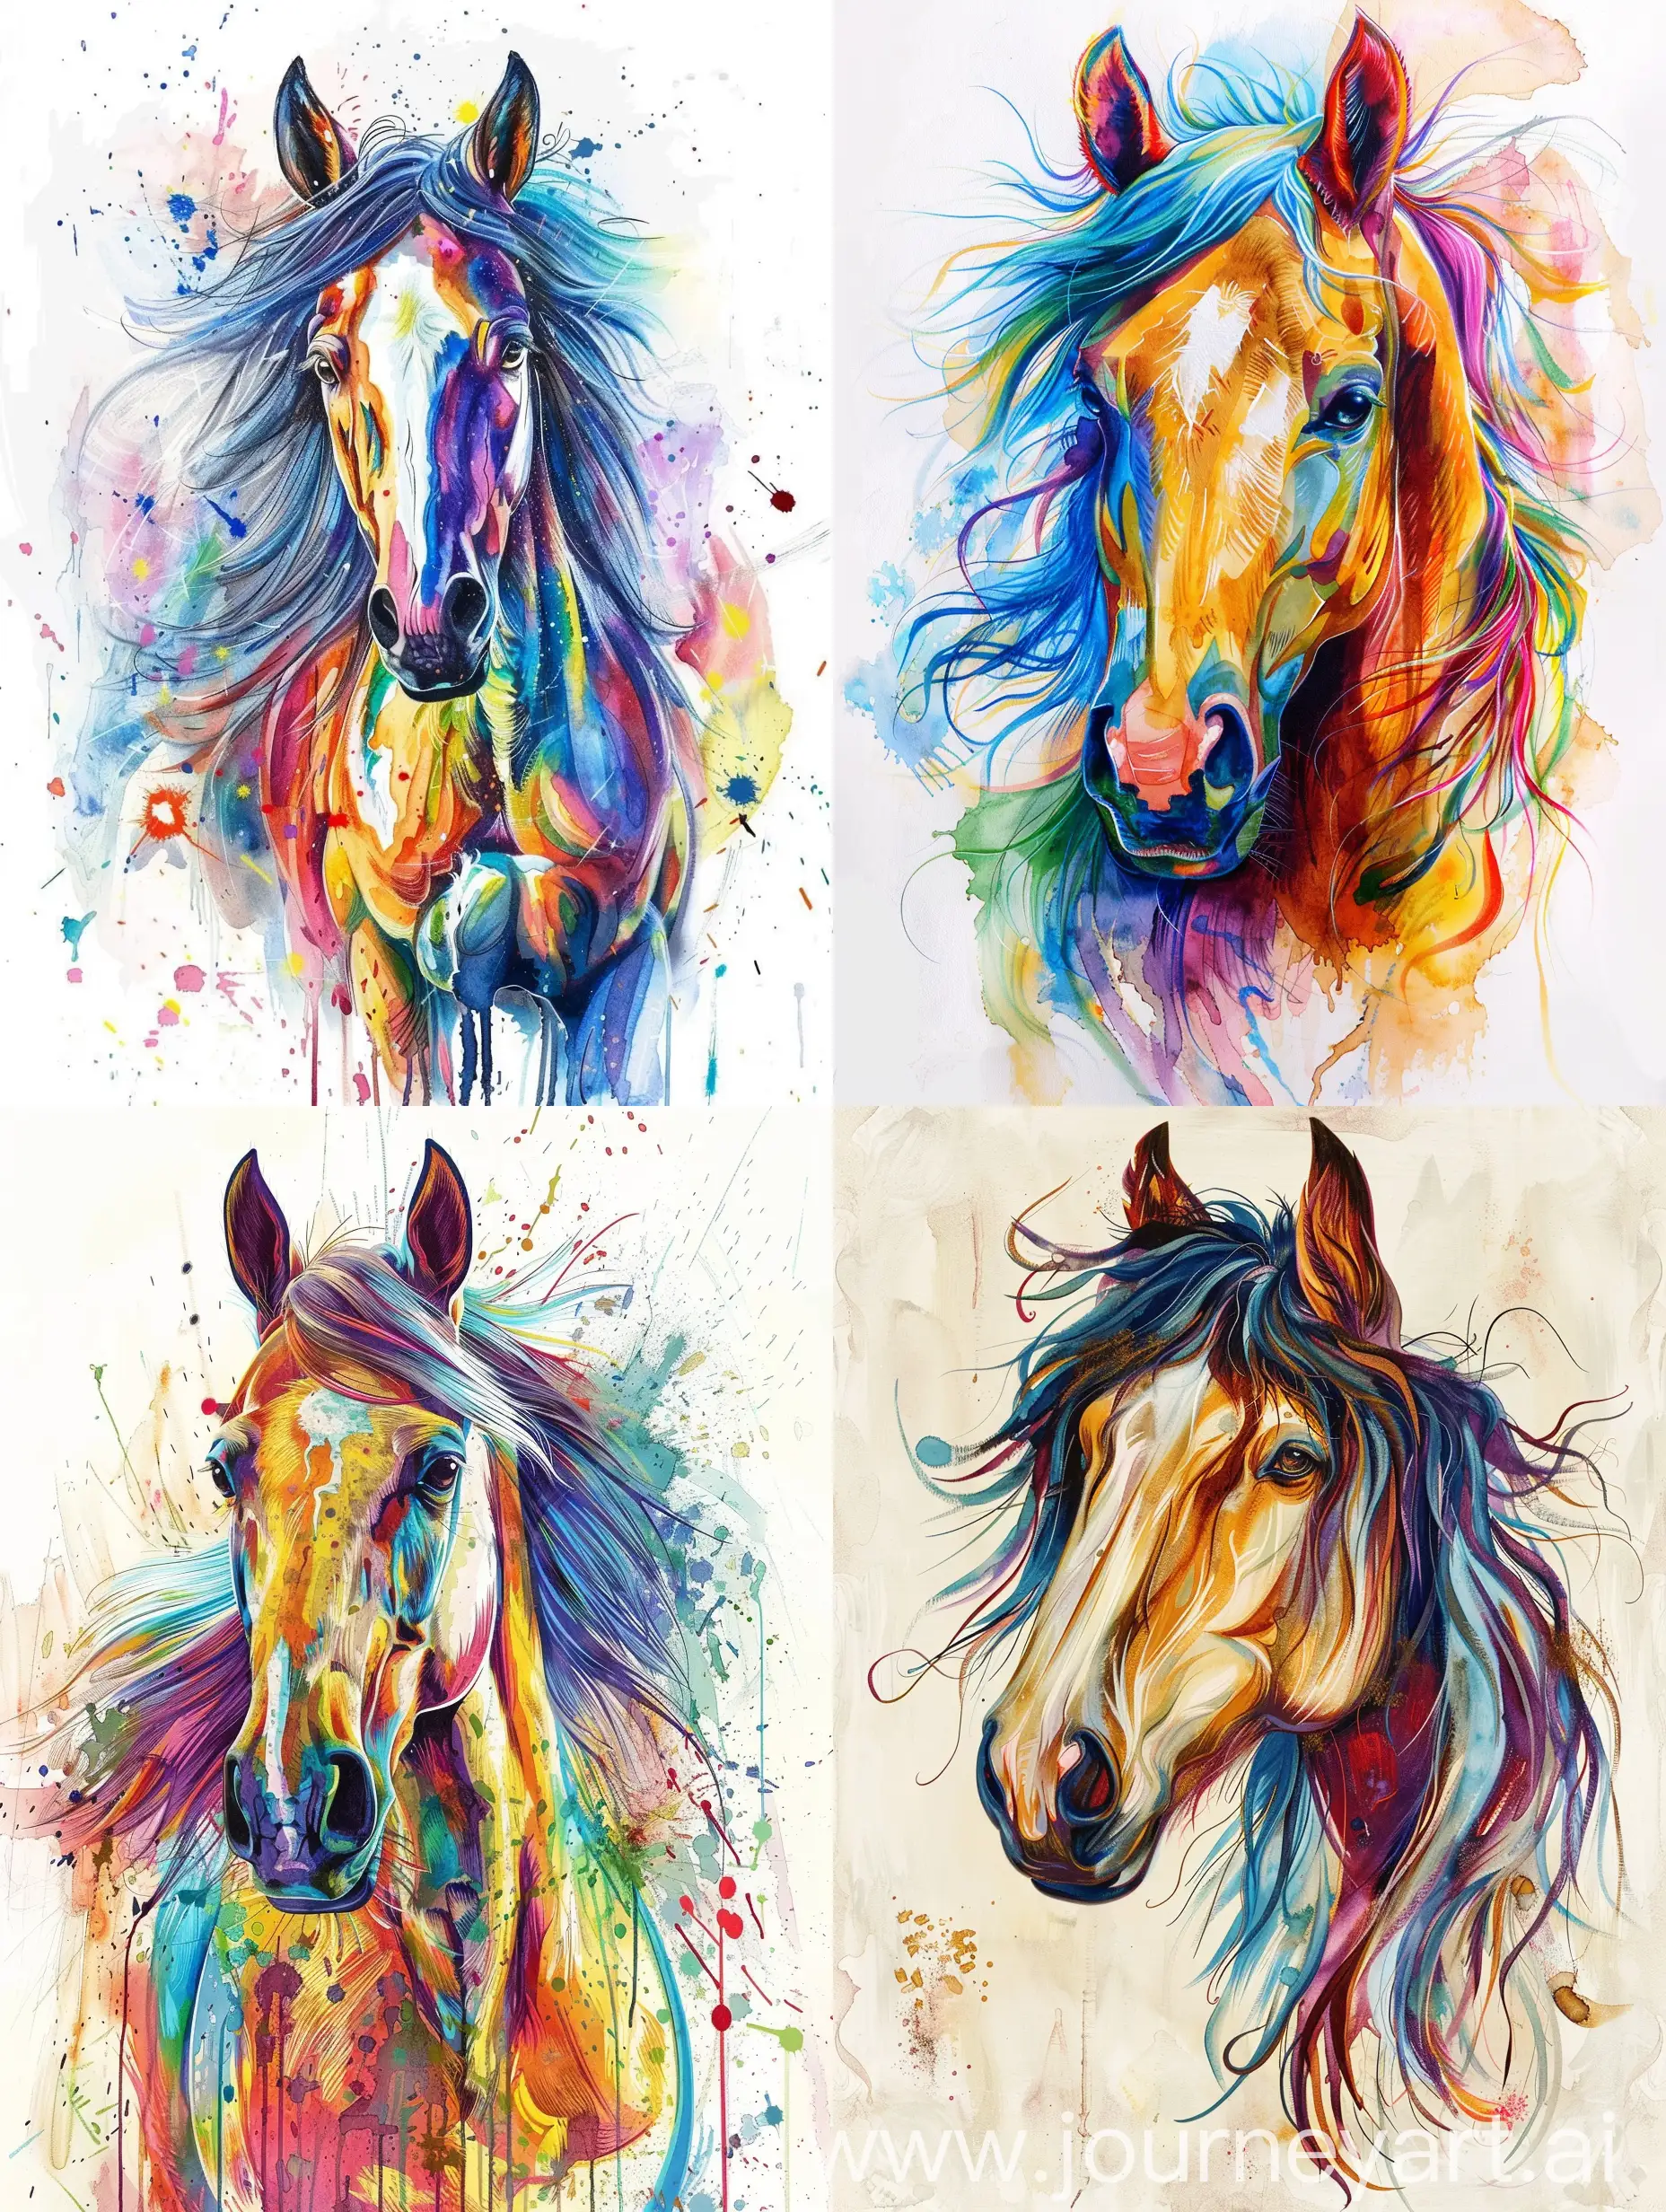 Vibrant-Horse-Painting-Colorful-Artistic-Representation